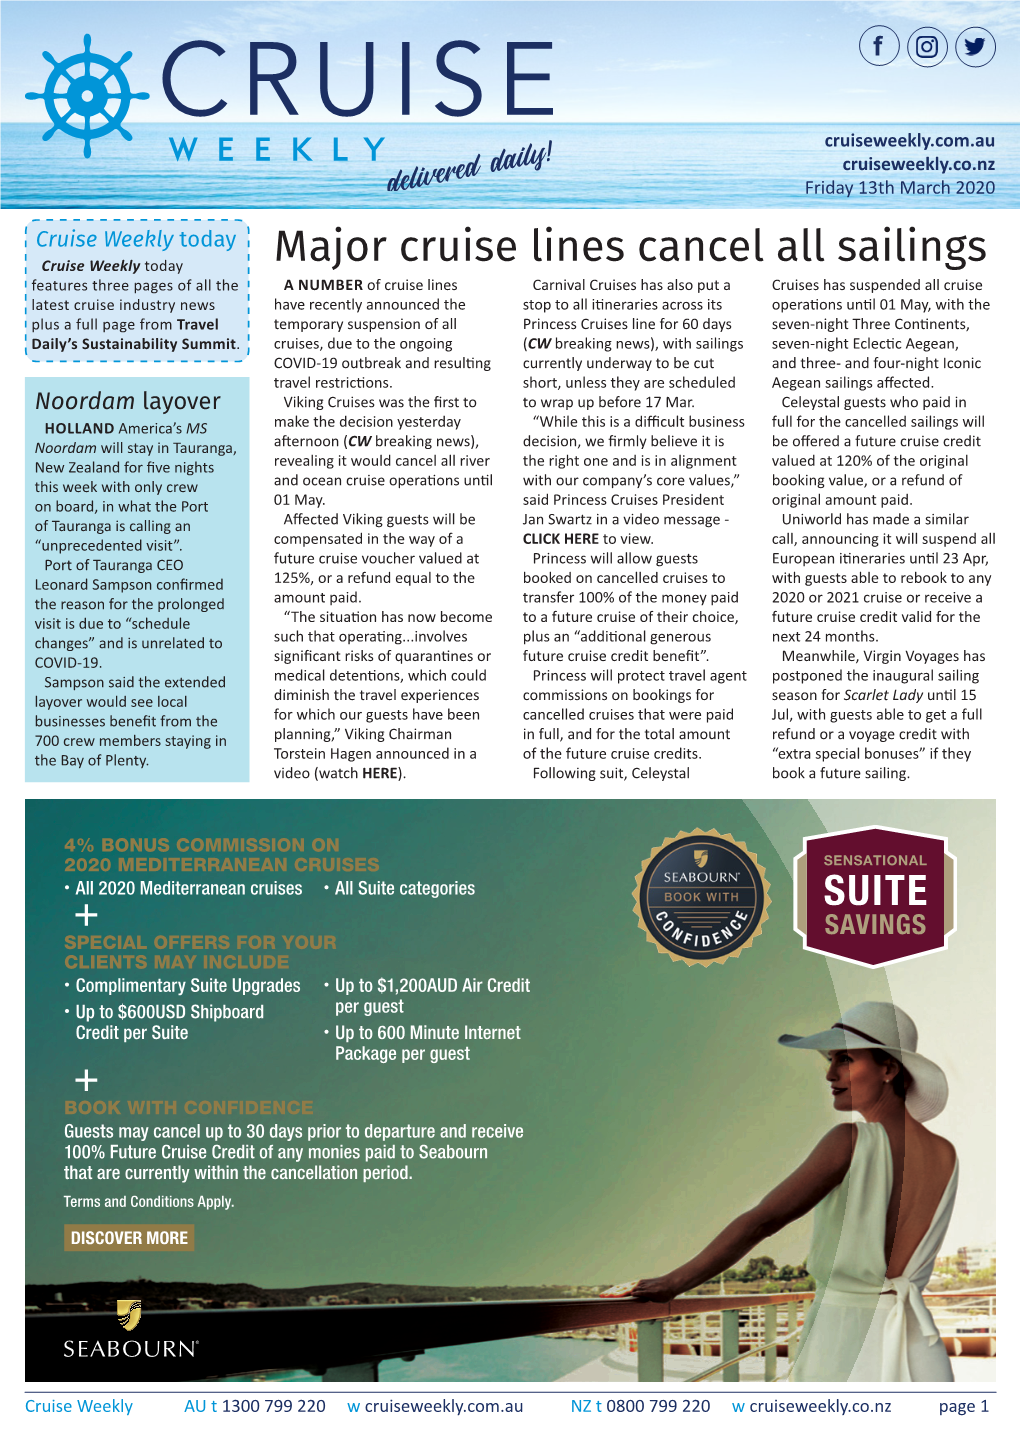 Major Cruise Lines Cancel All Sailings